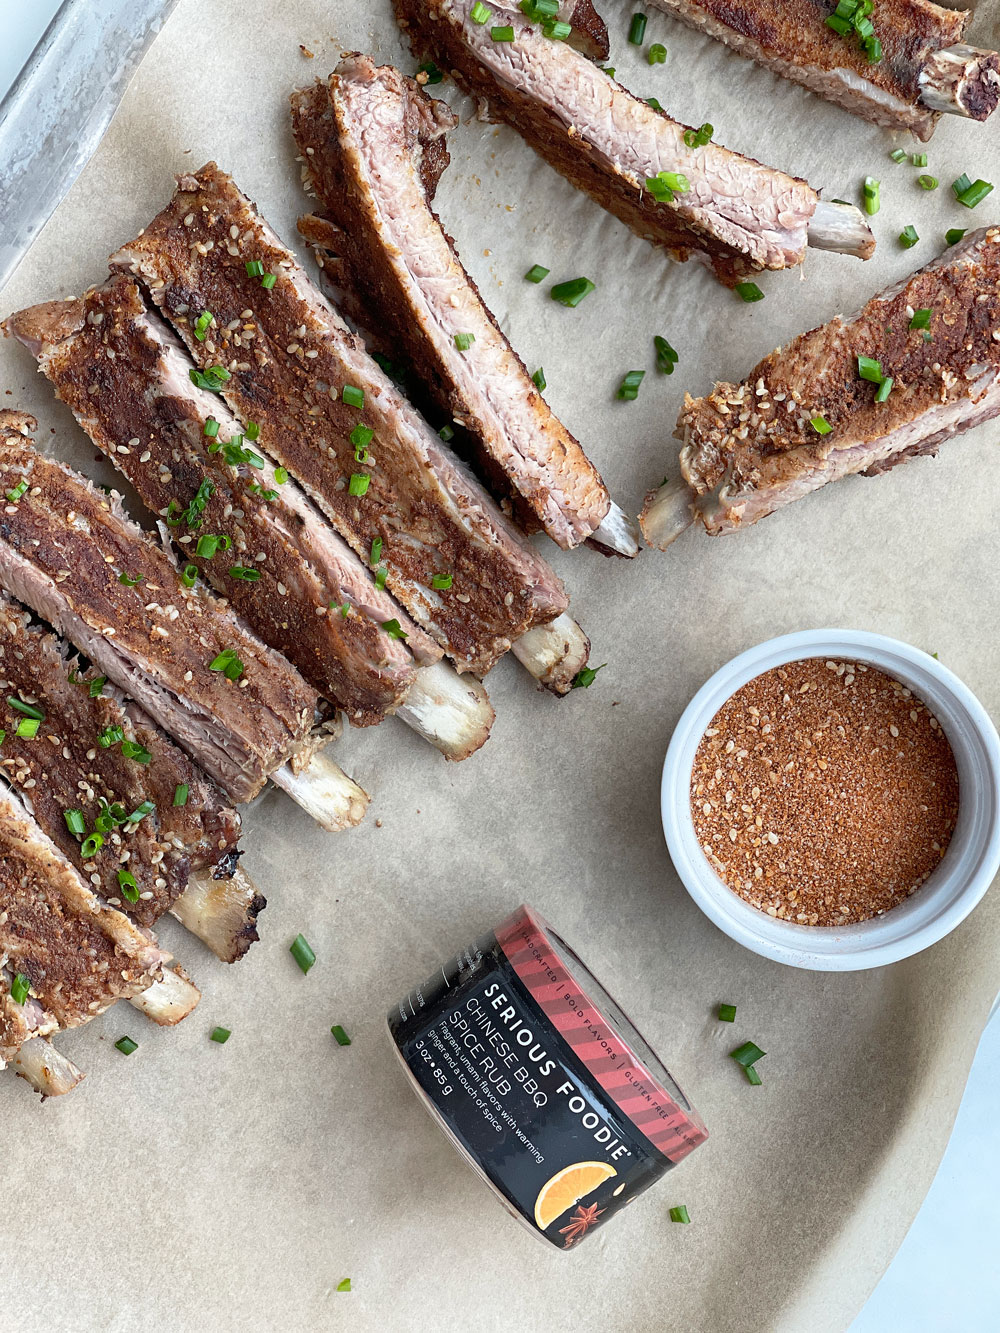 The Best Slow Cooker Ribs. The juiciest ribs can be made in the crock pot with very little work. Happy Cooking! www.ChopHappy.com #ribsrecipe #slowcookerrecipe